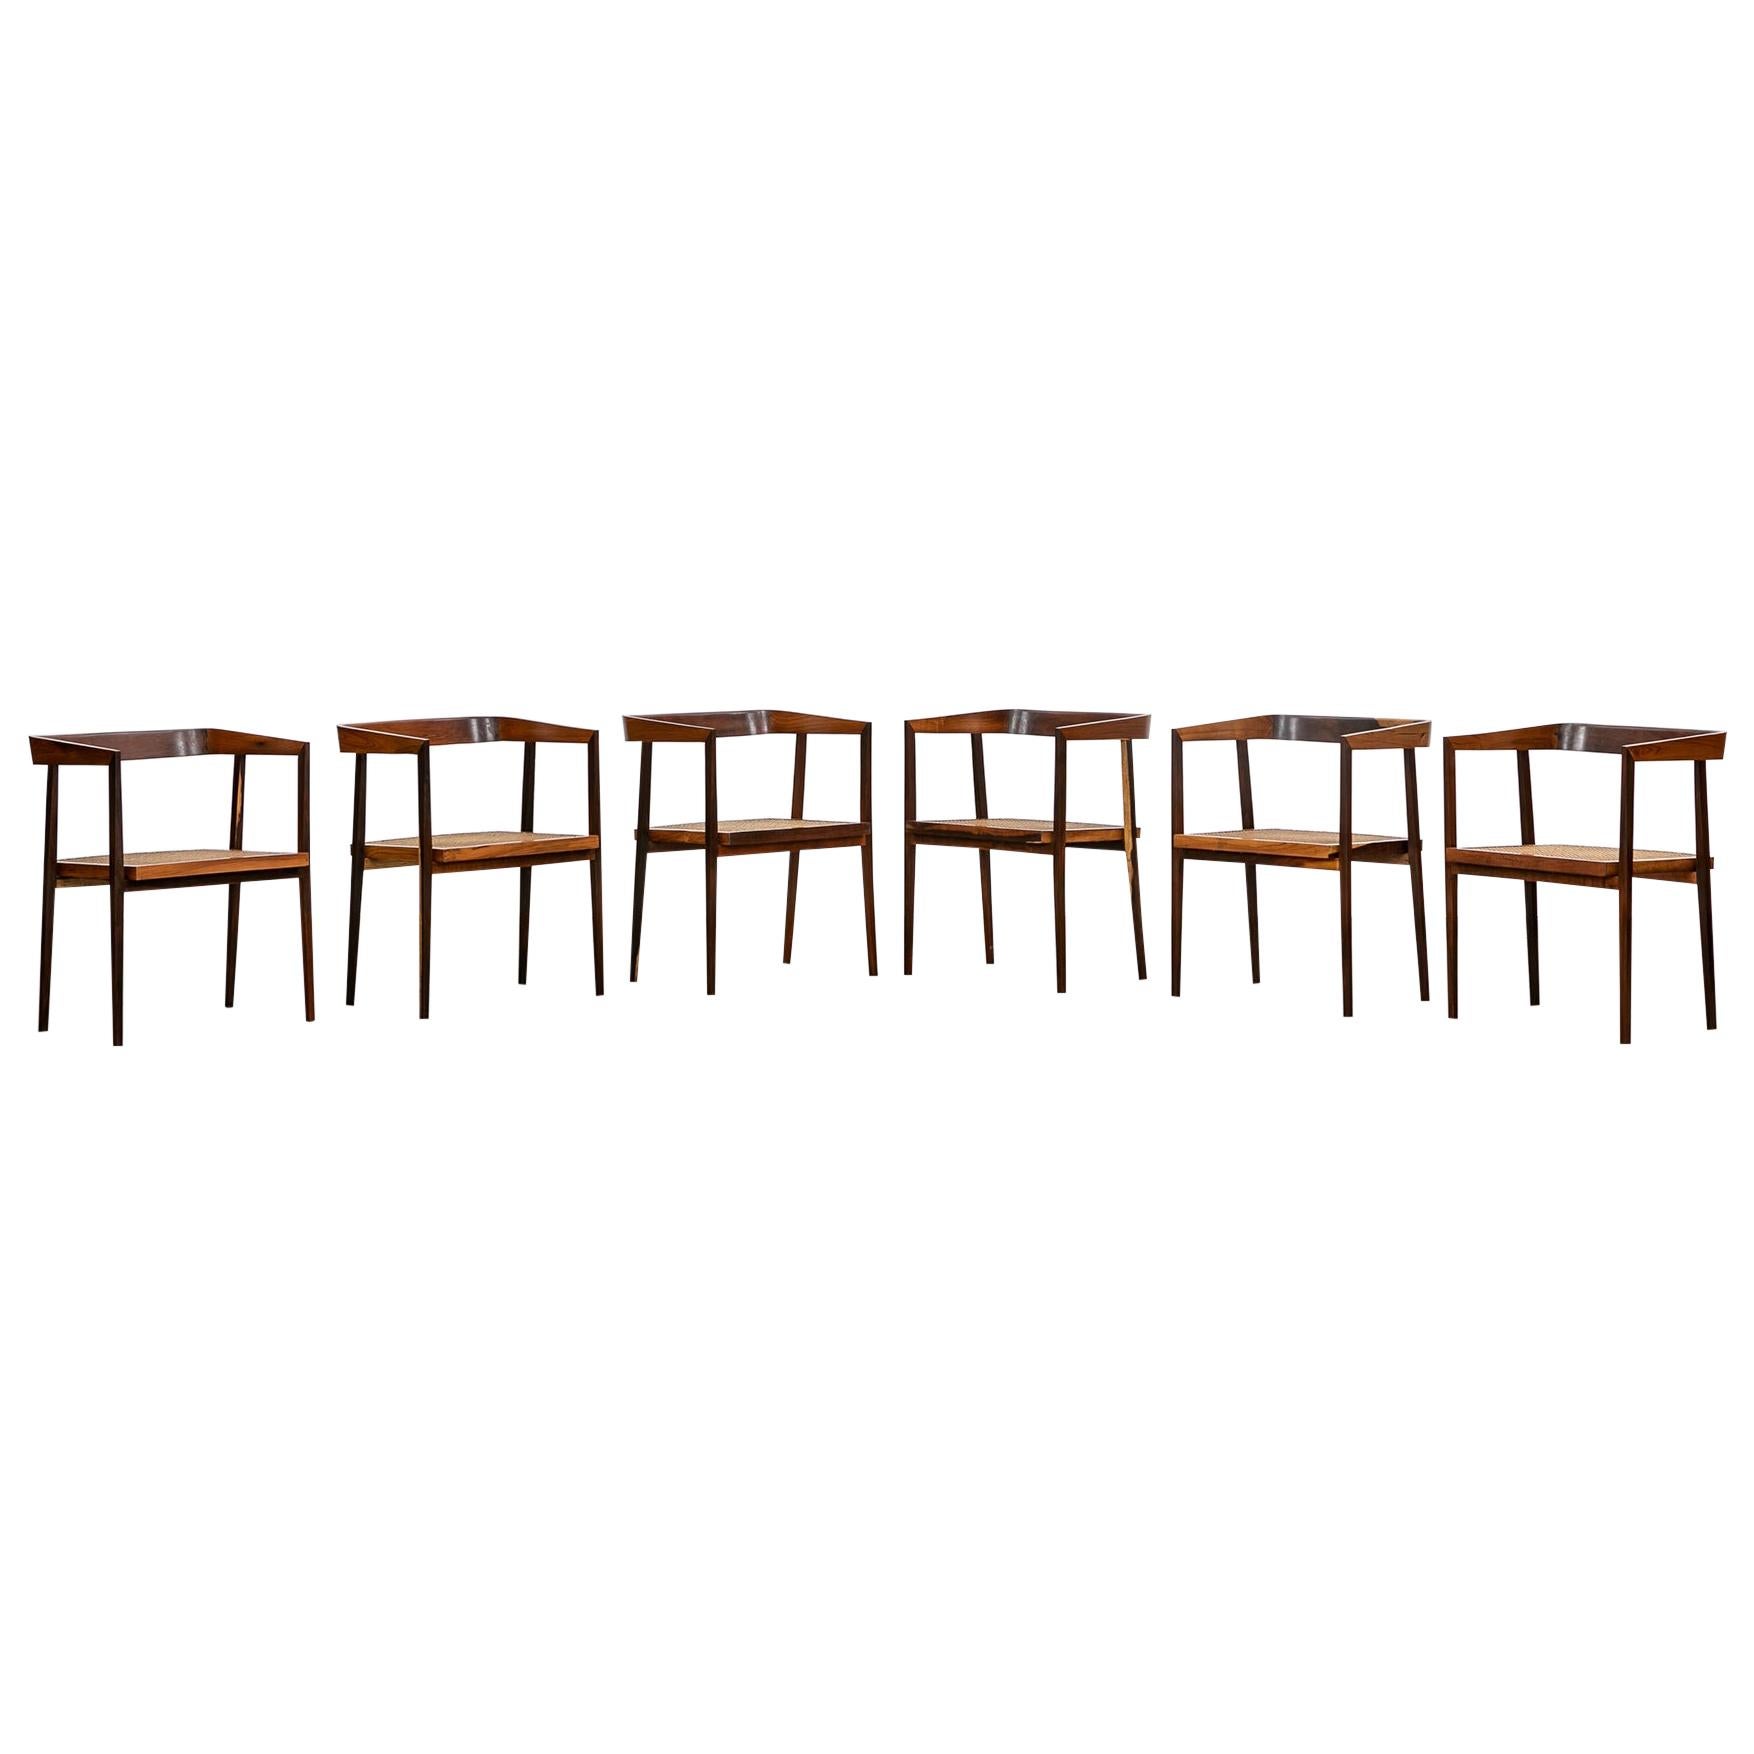 1960s brown wood and cane Chairs by Joaquim Tenreiro